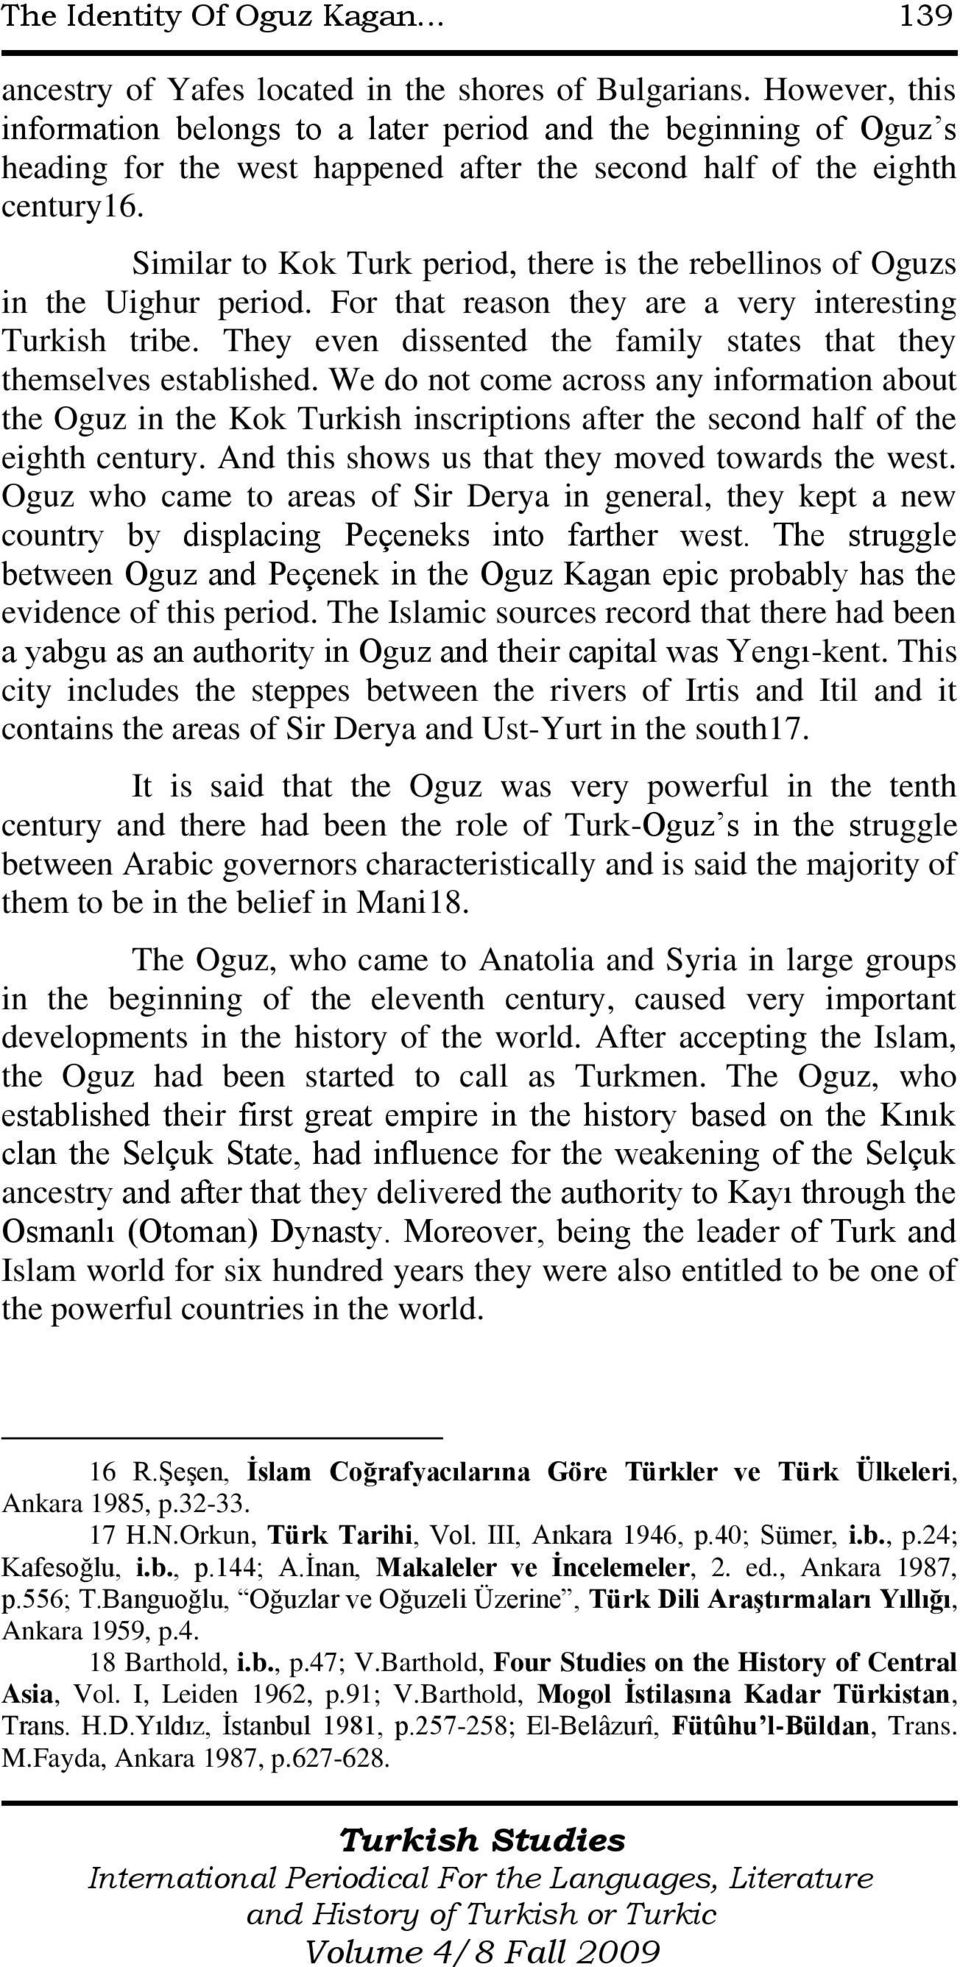 Similar to Kok Turk period, there is the rebellinos of Oguzs in the Uighur period. For that reason they are a very interesting Turkish tribe.